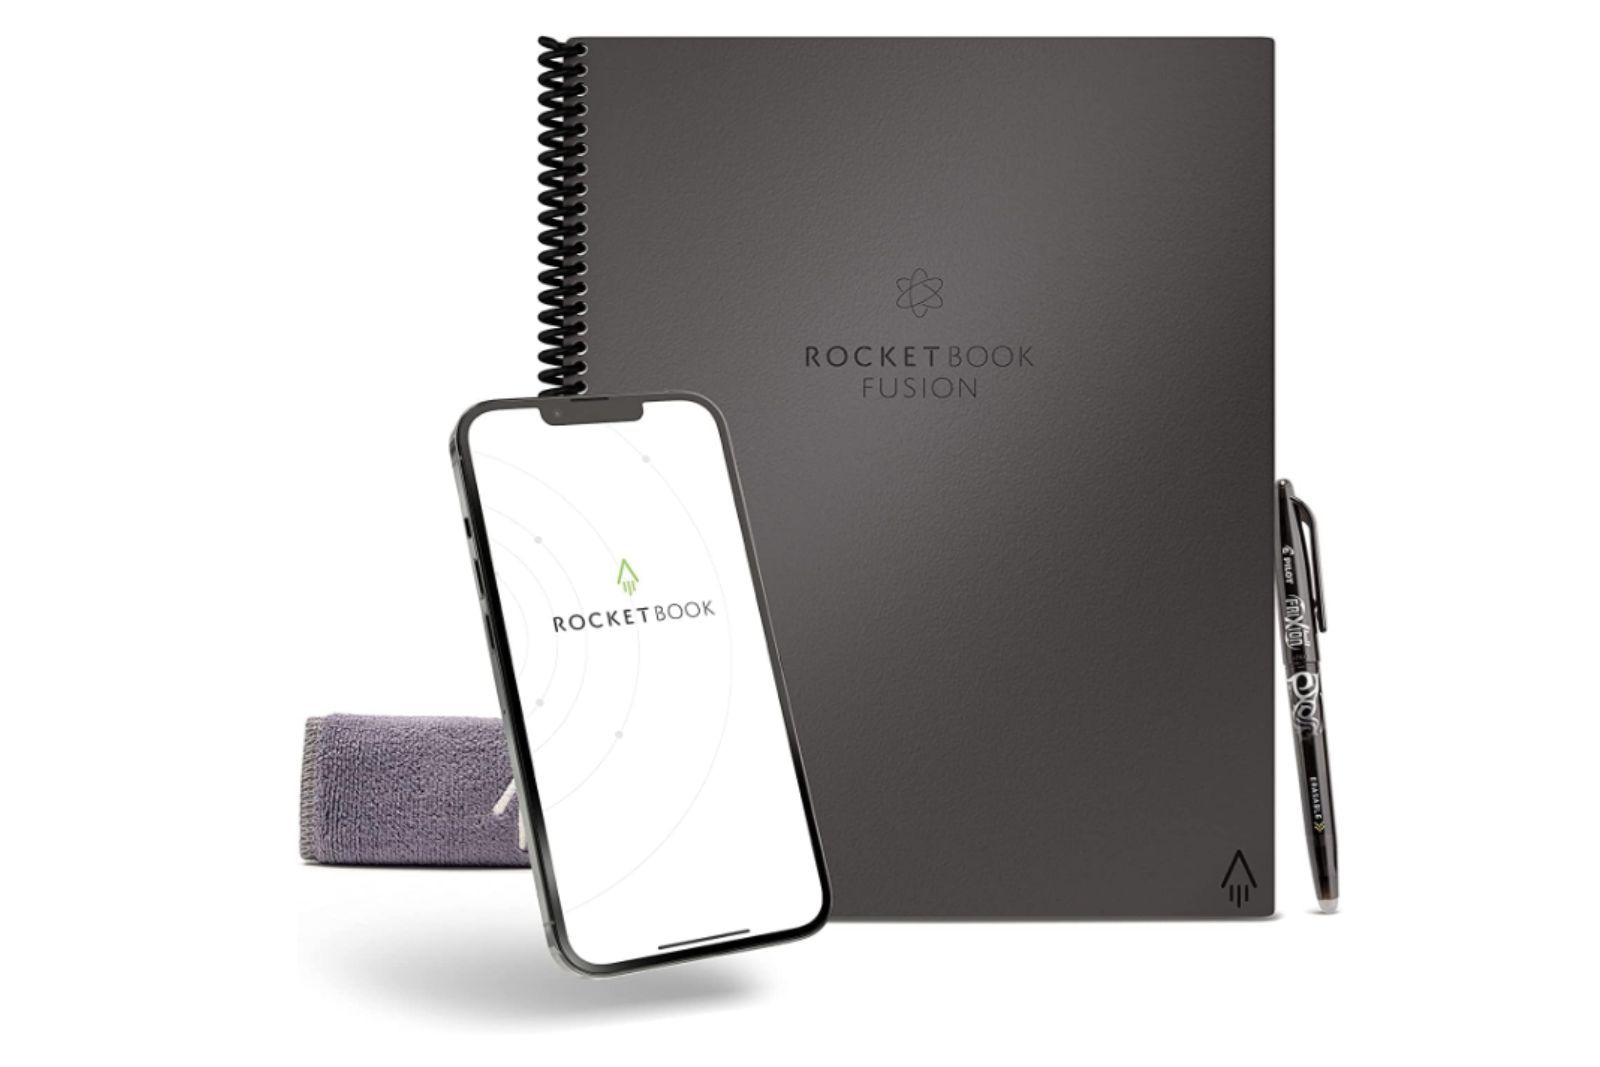 Rocketboot Fusion notebook tag image white background, gray notebook, light gray cloth, and black pen with smart phone in front displaying brand name Rocketbook